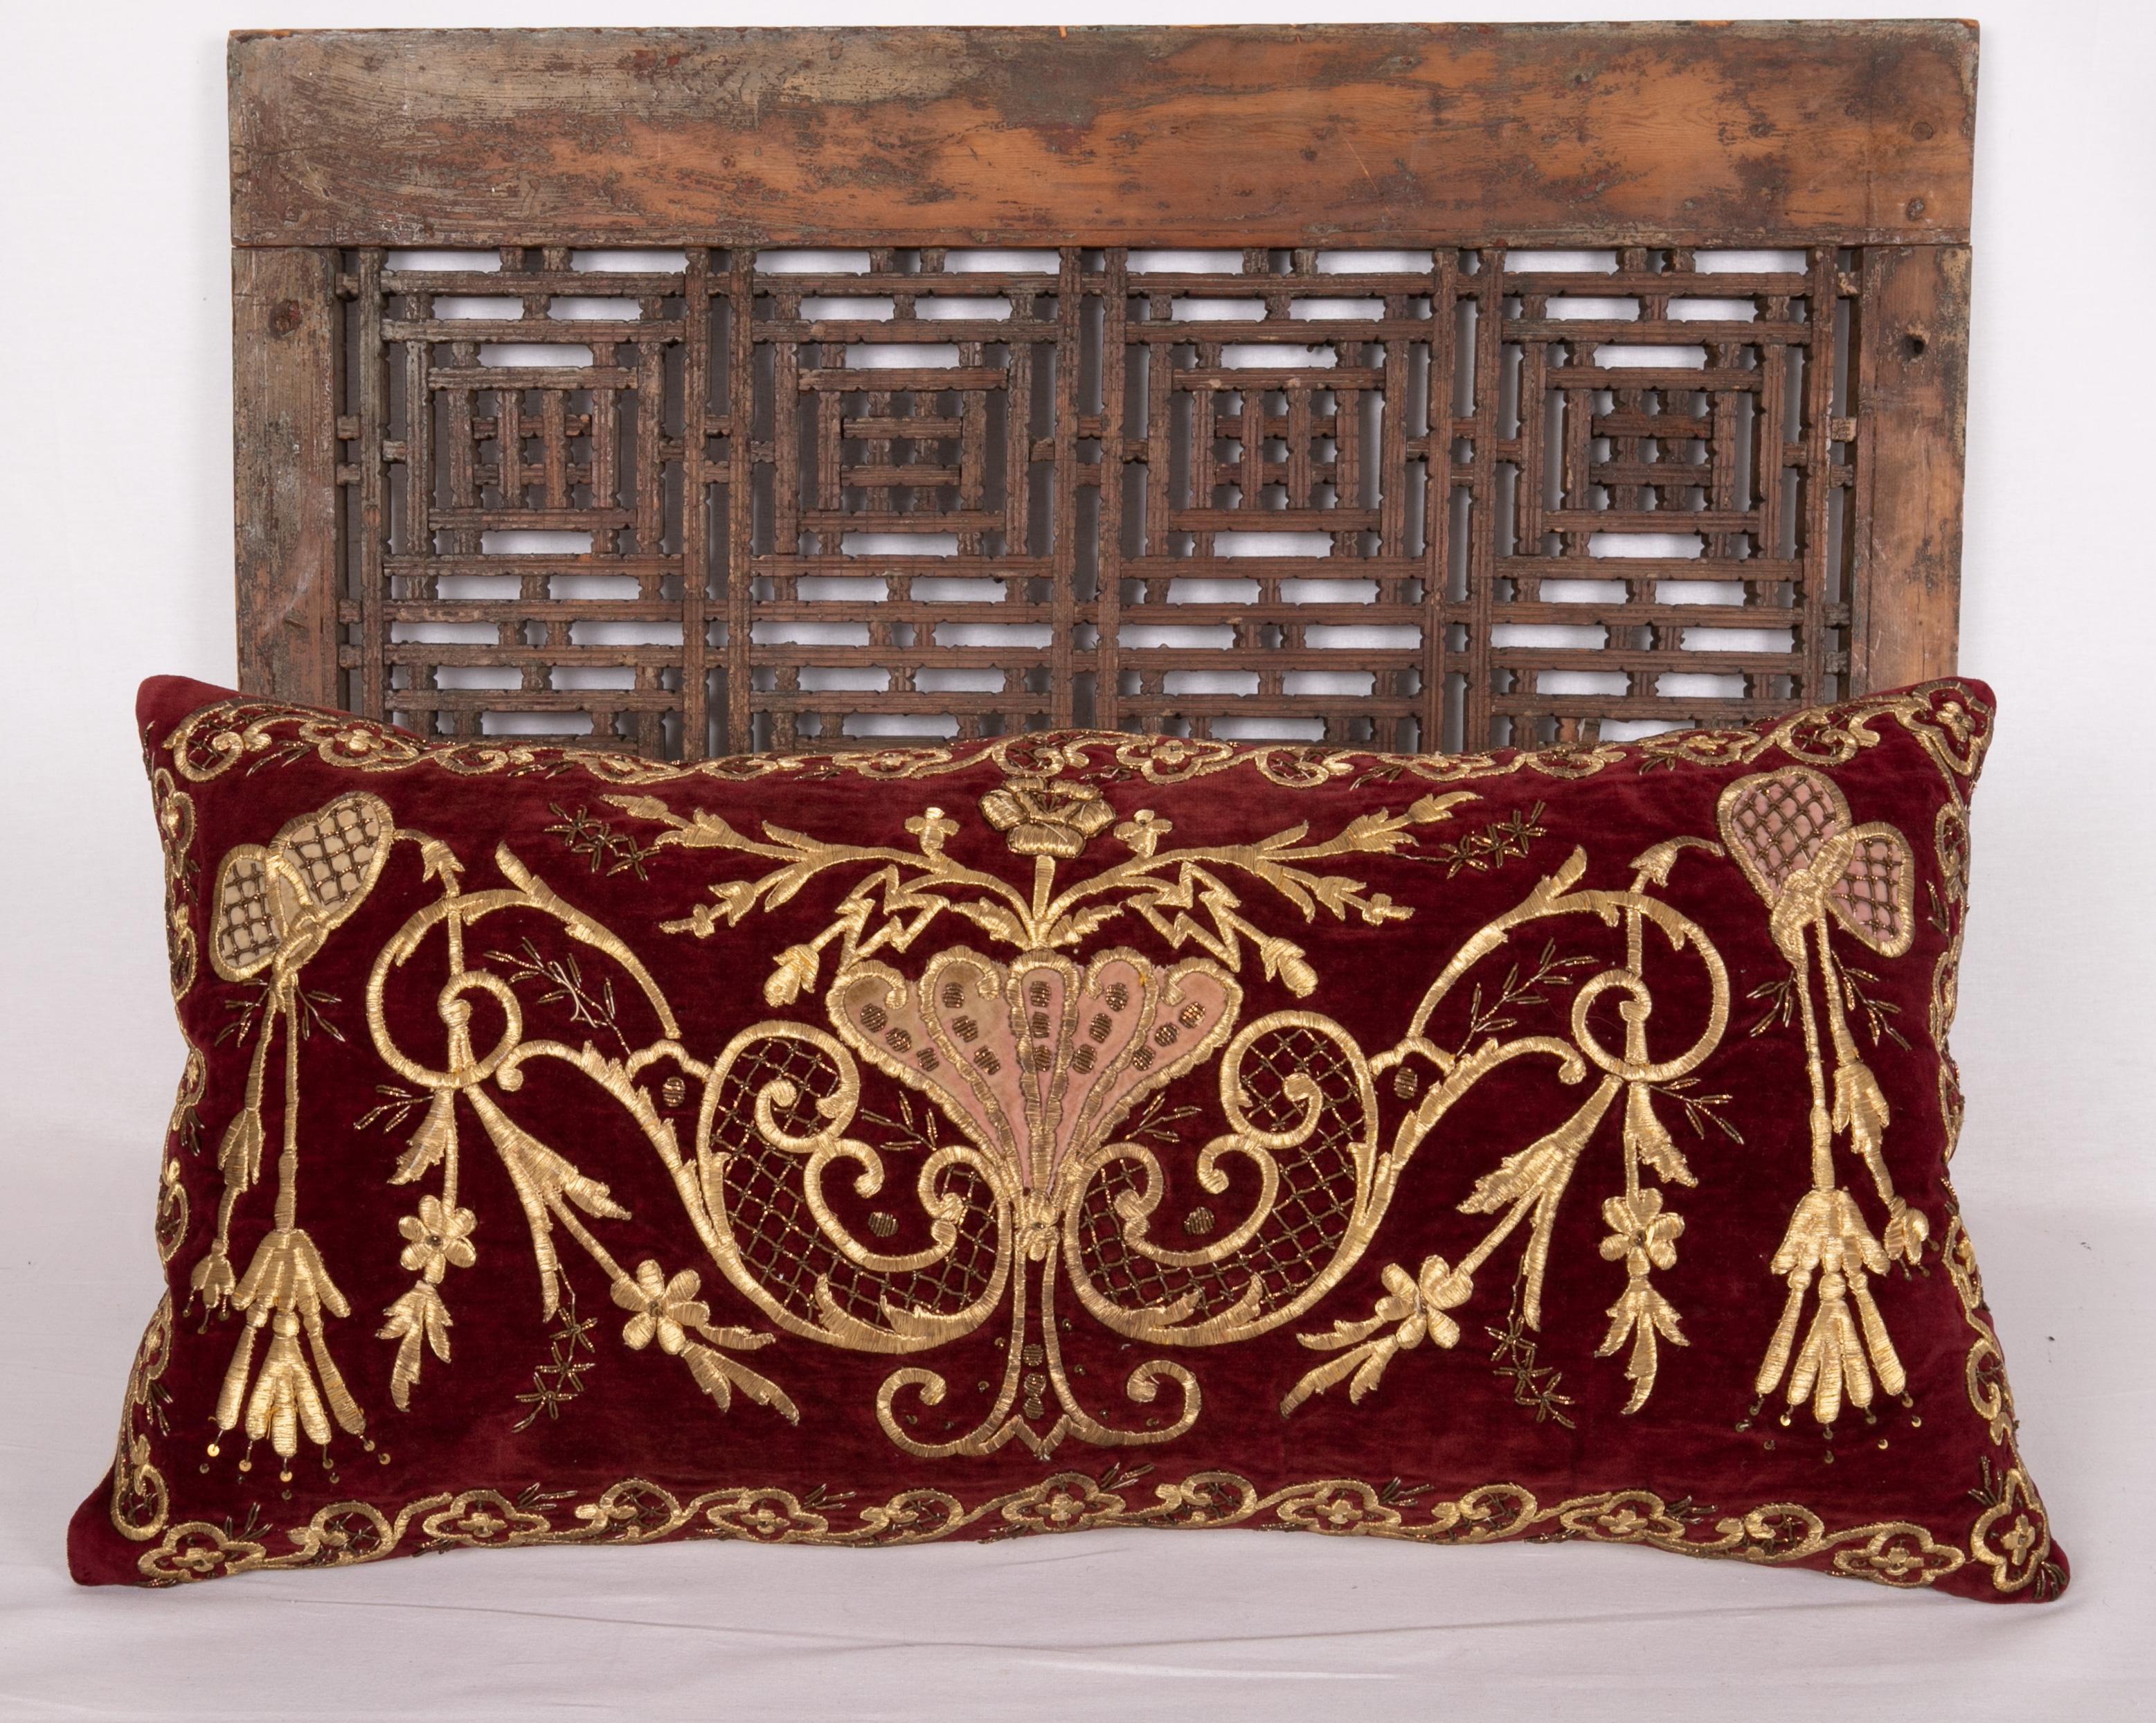 Turkish Antique Ottoman Gold on Purple Pillow Case, Late 19th C.